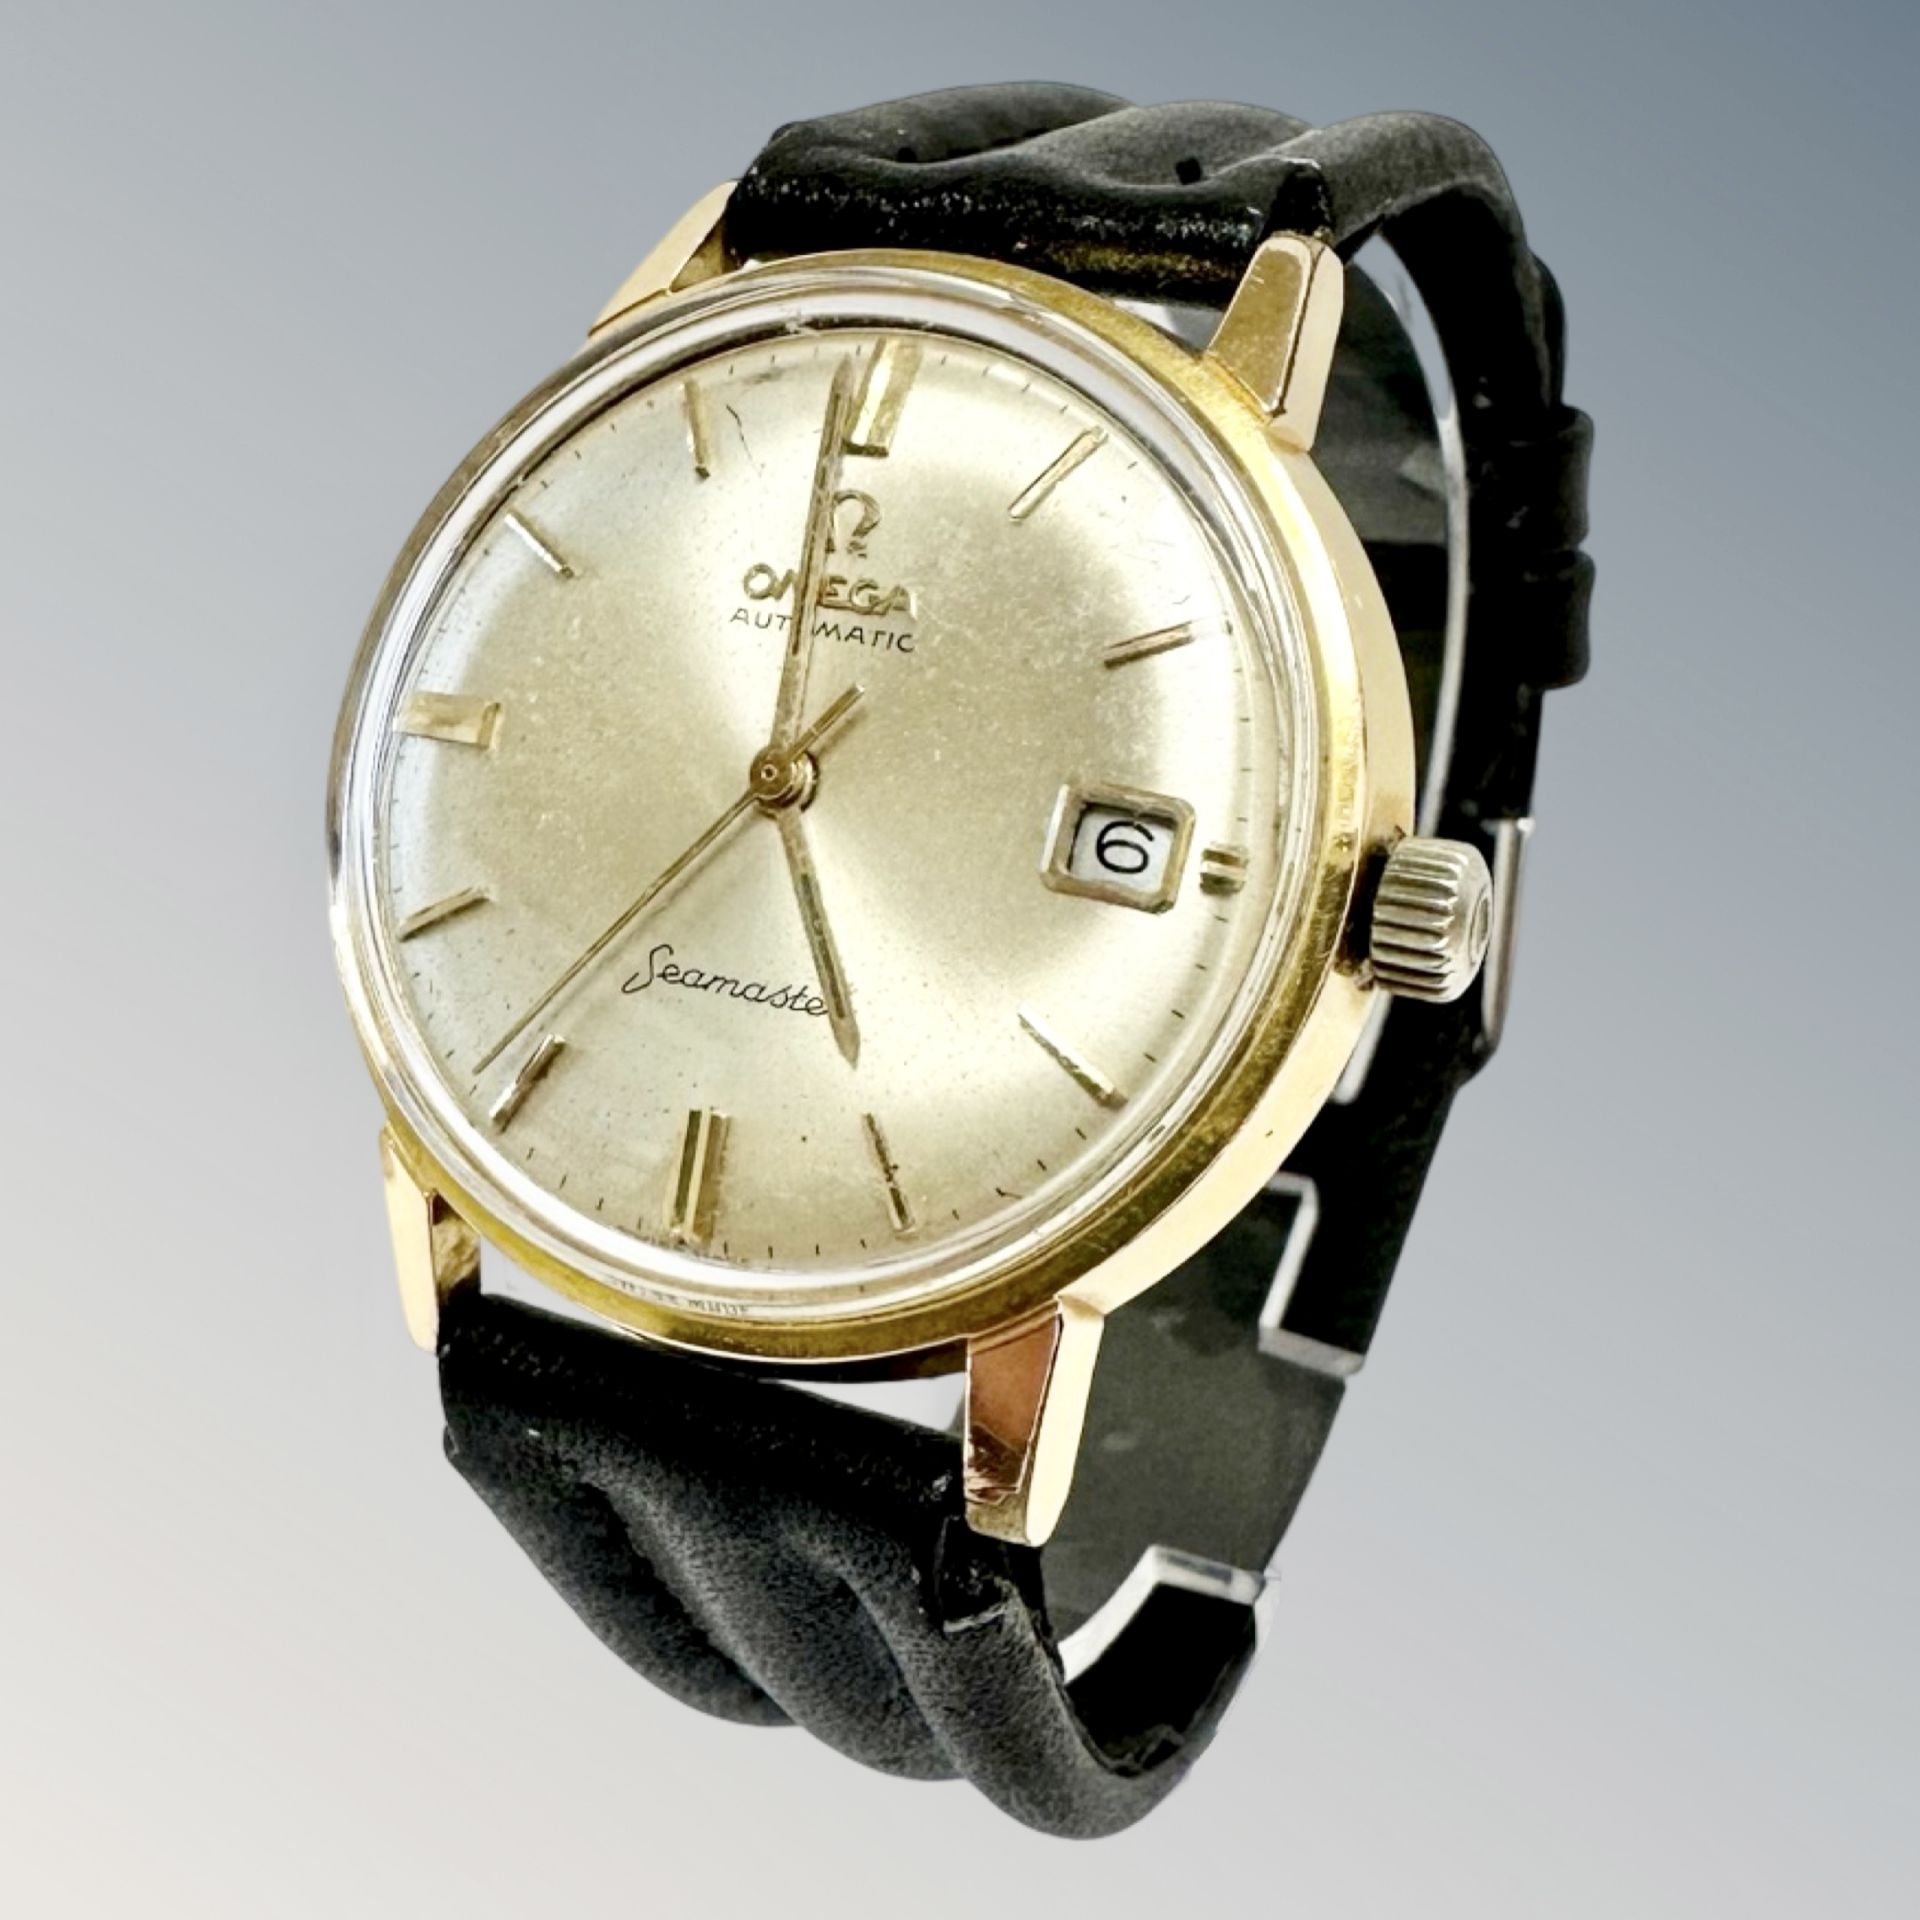 A gent's gold plated and stainless steel Omega wristwatch with replacement Omega dial.